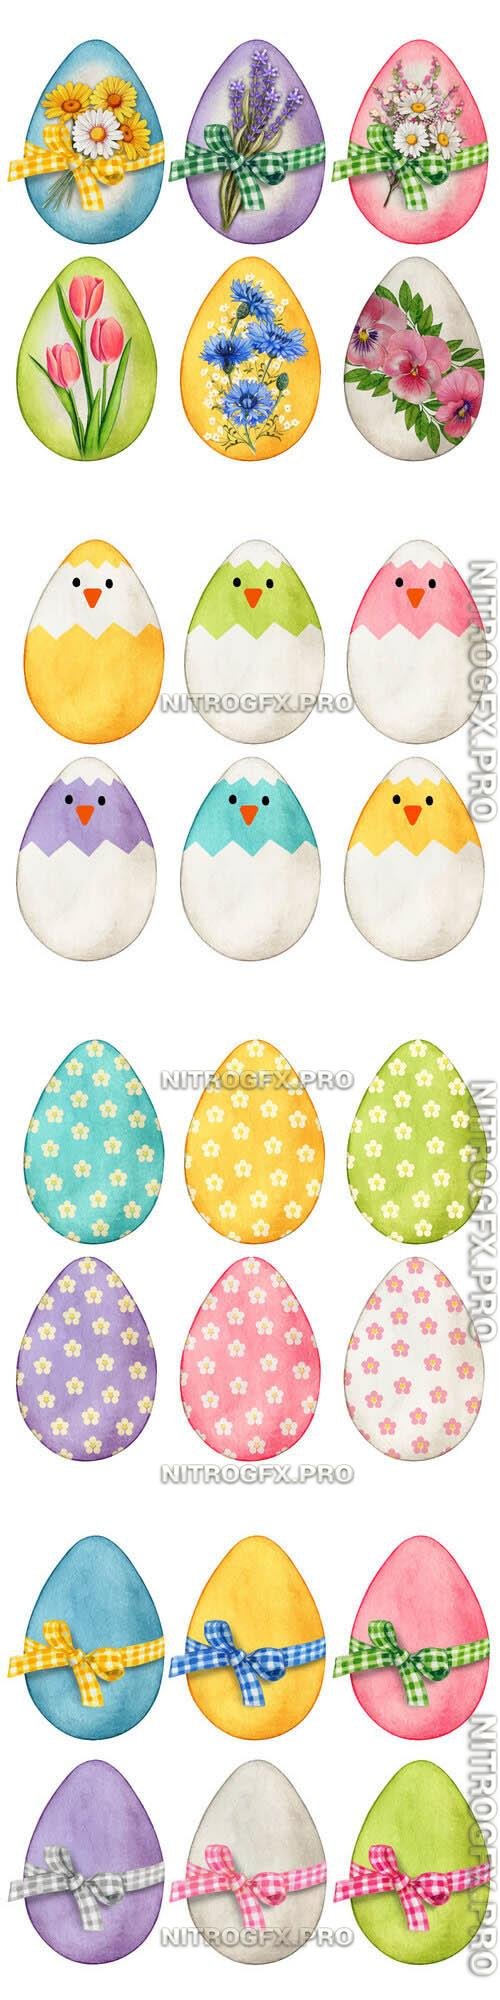 Pastel easter eggs decorations - Watercolor vector clipart